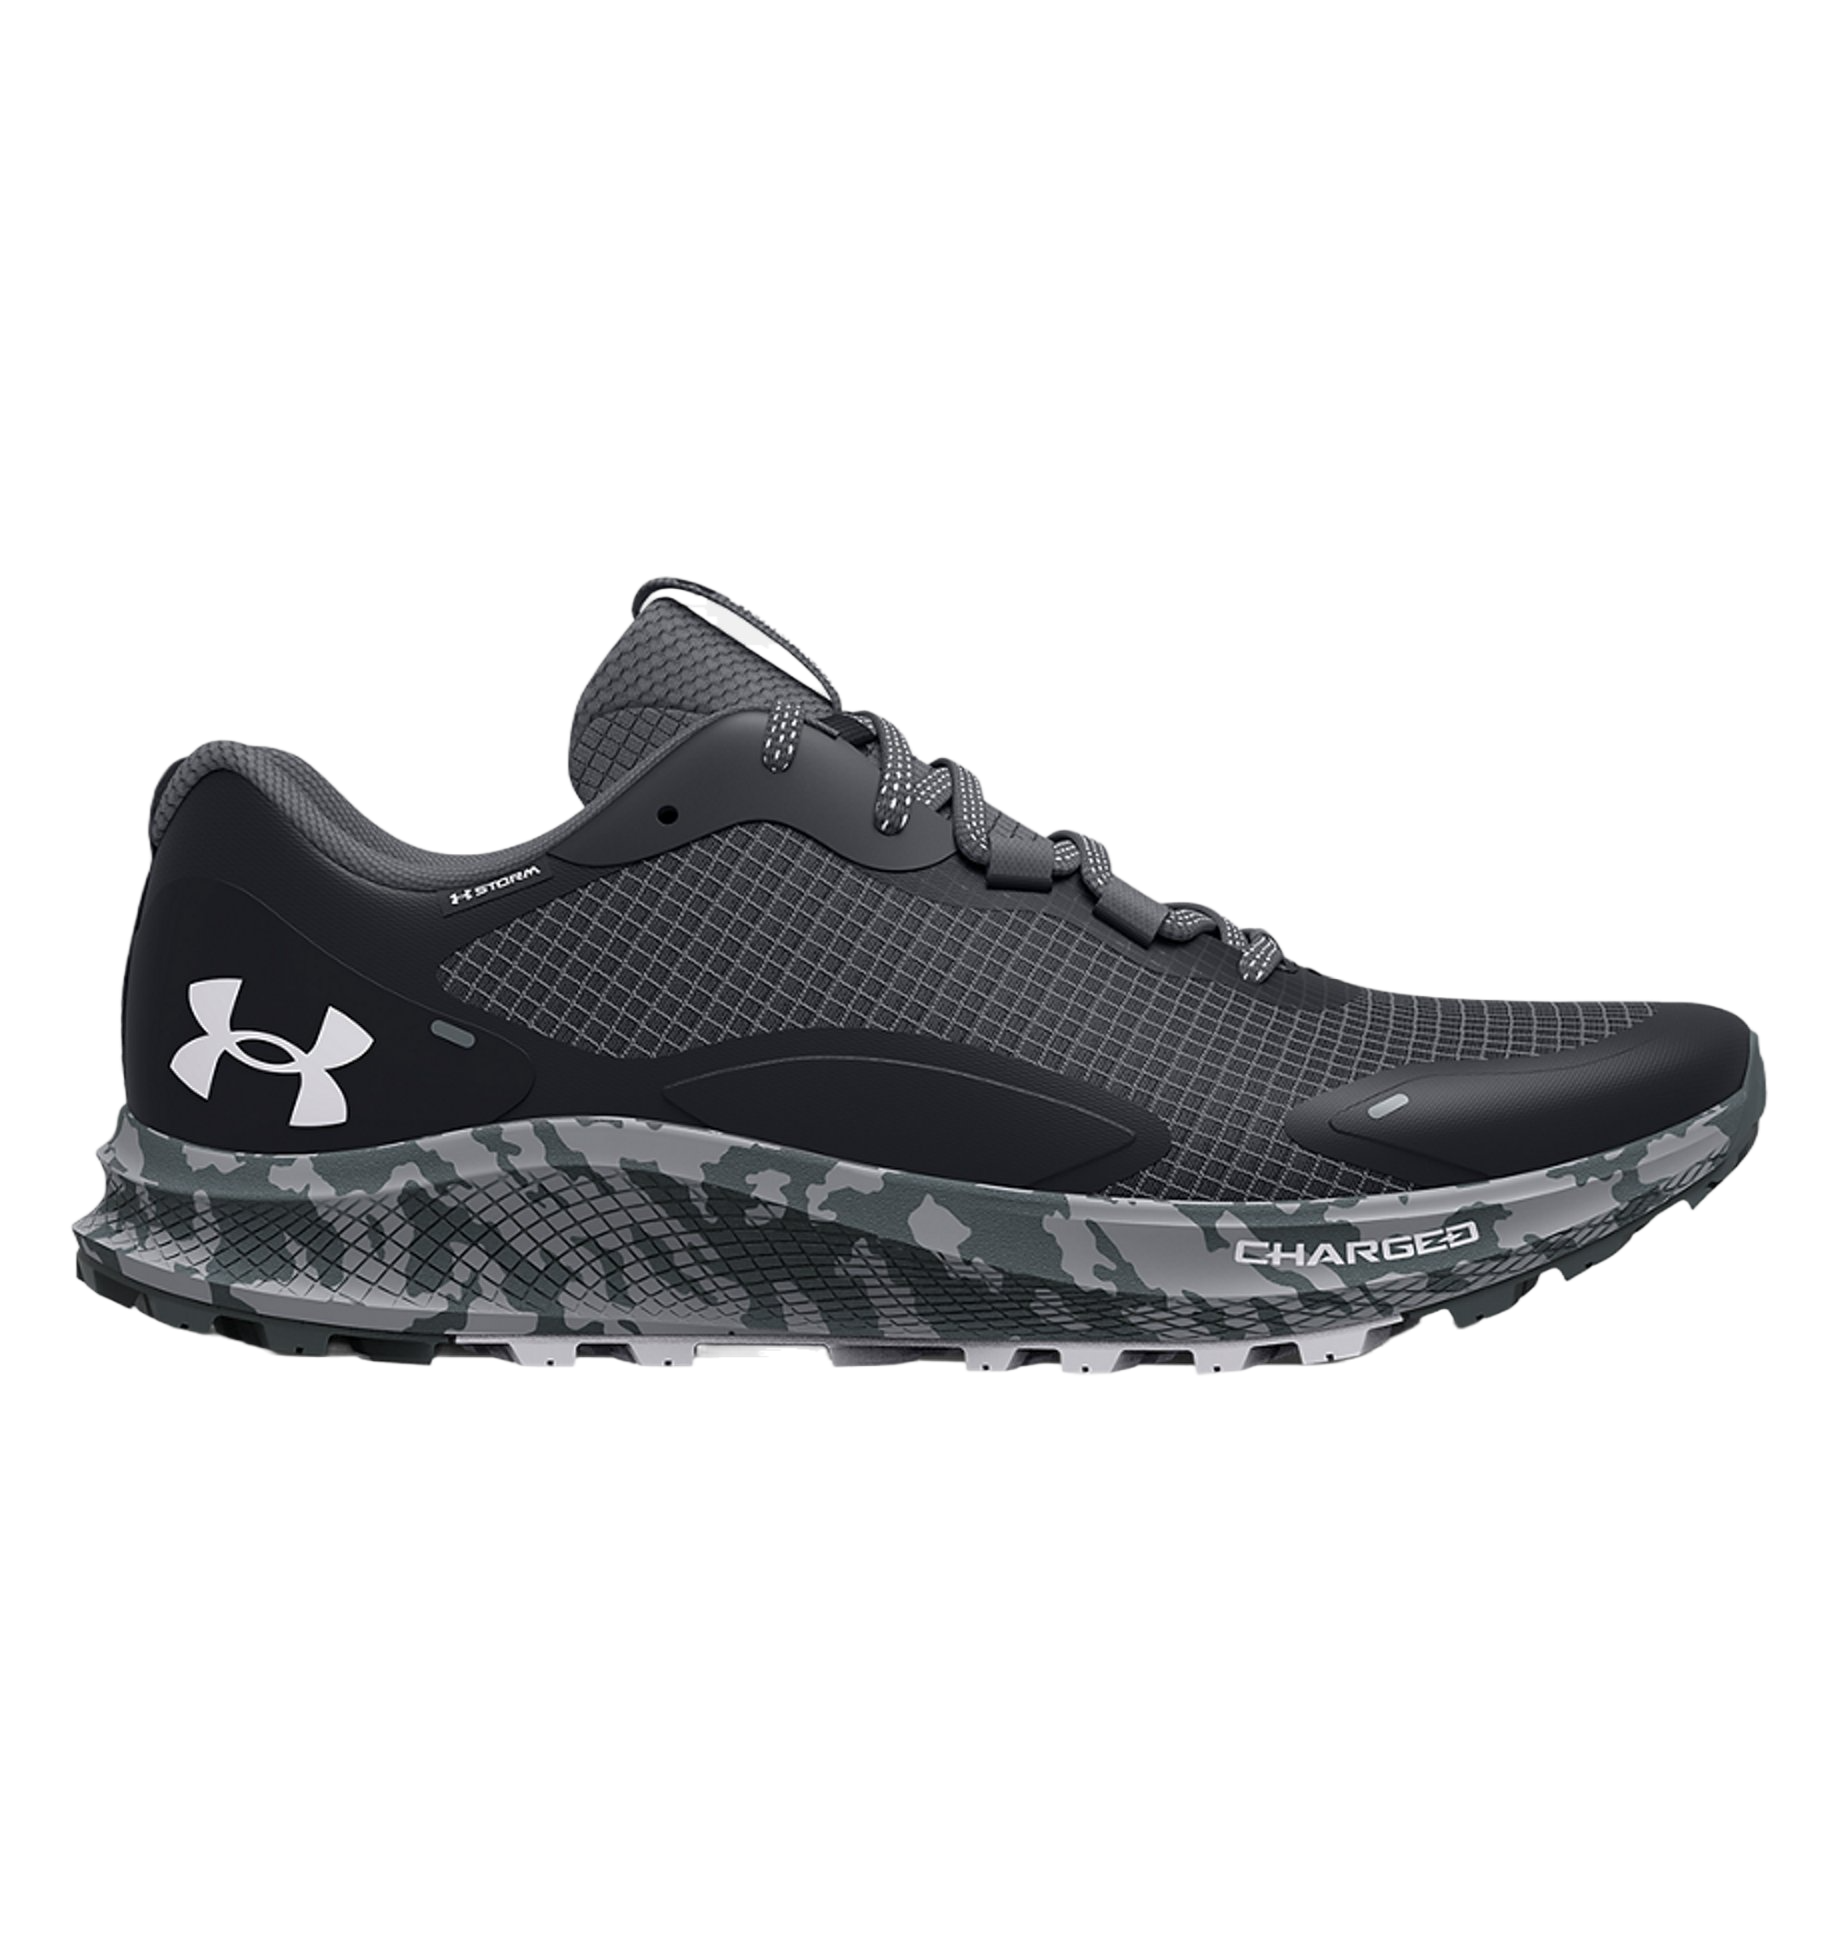 Under Armour Charged Bandit Trail 2 - Mens